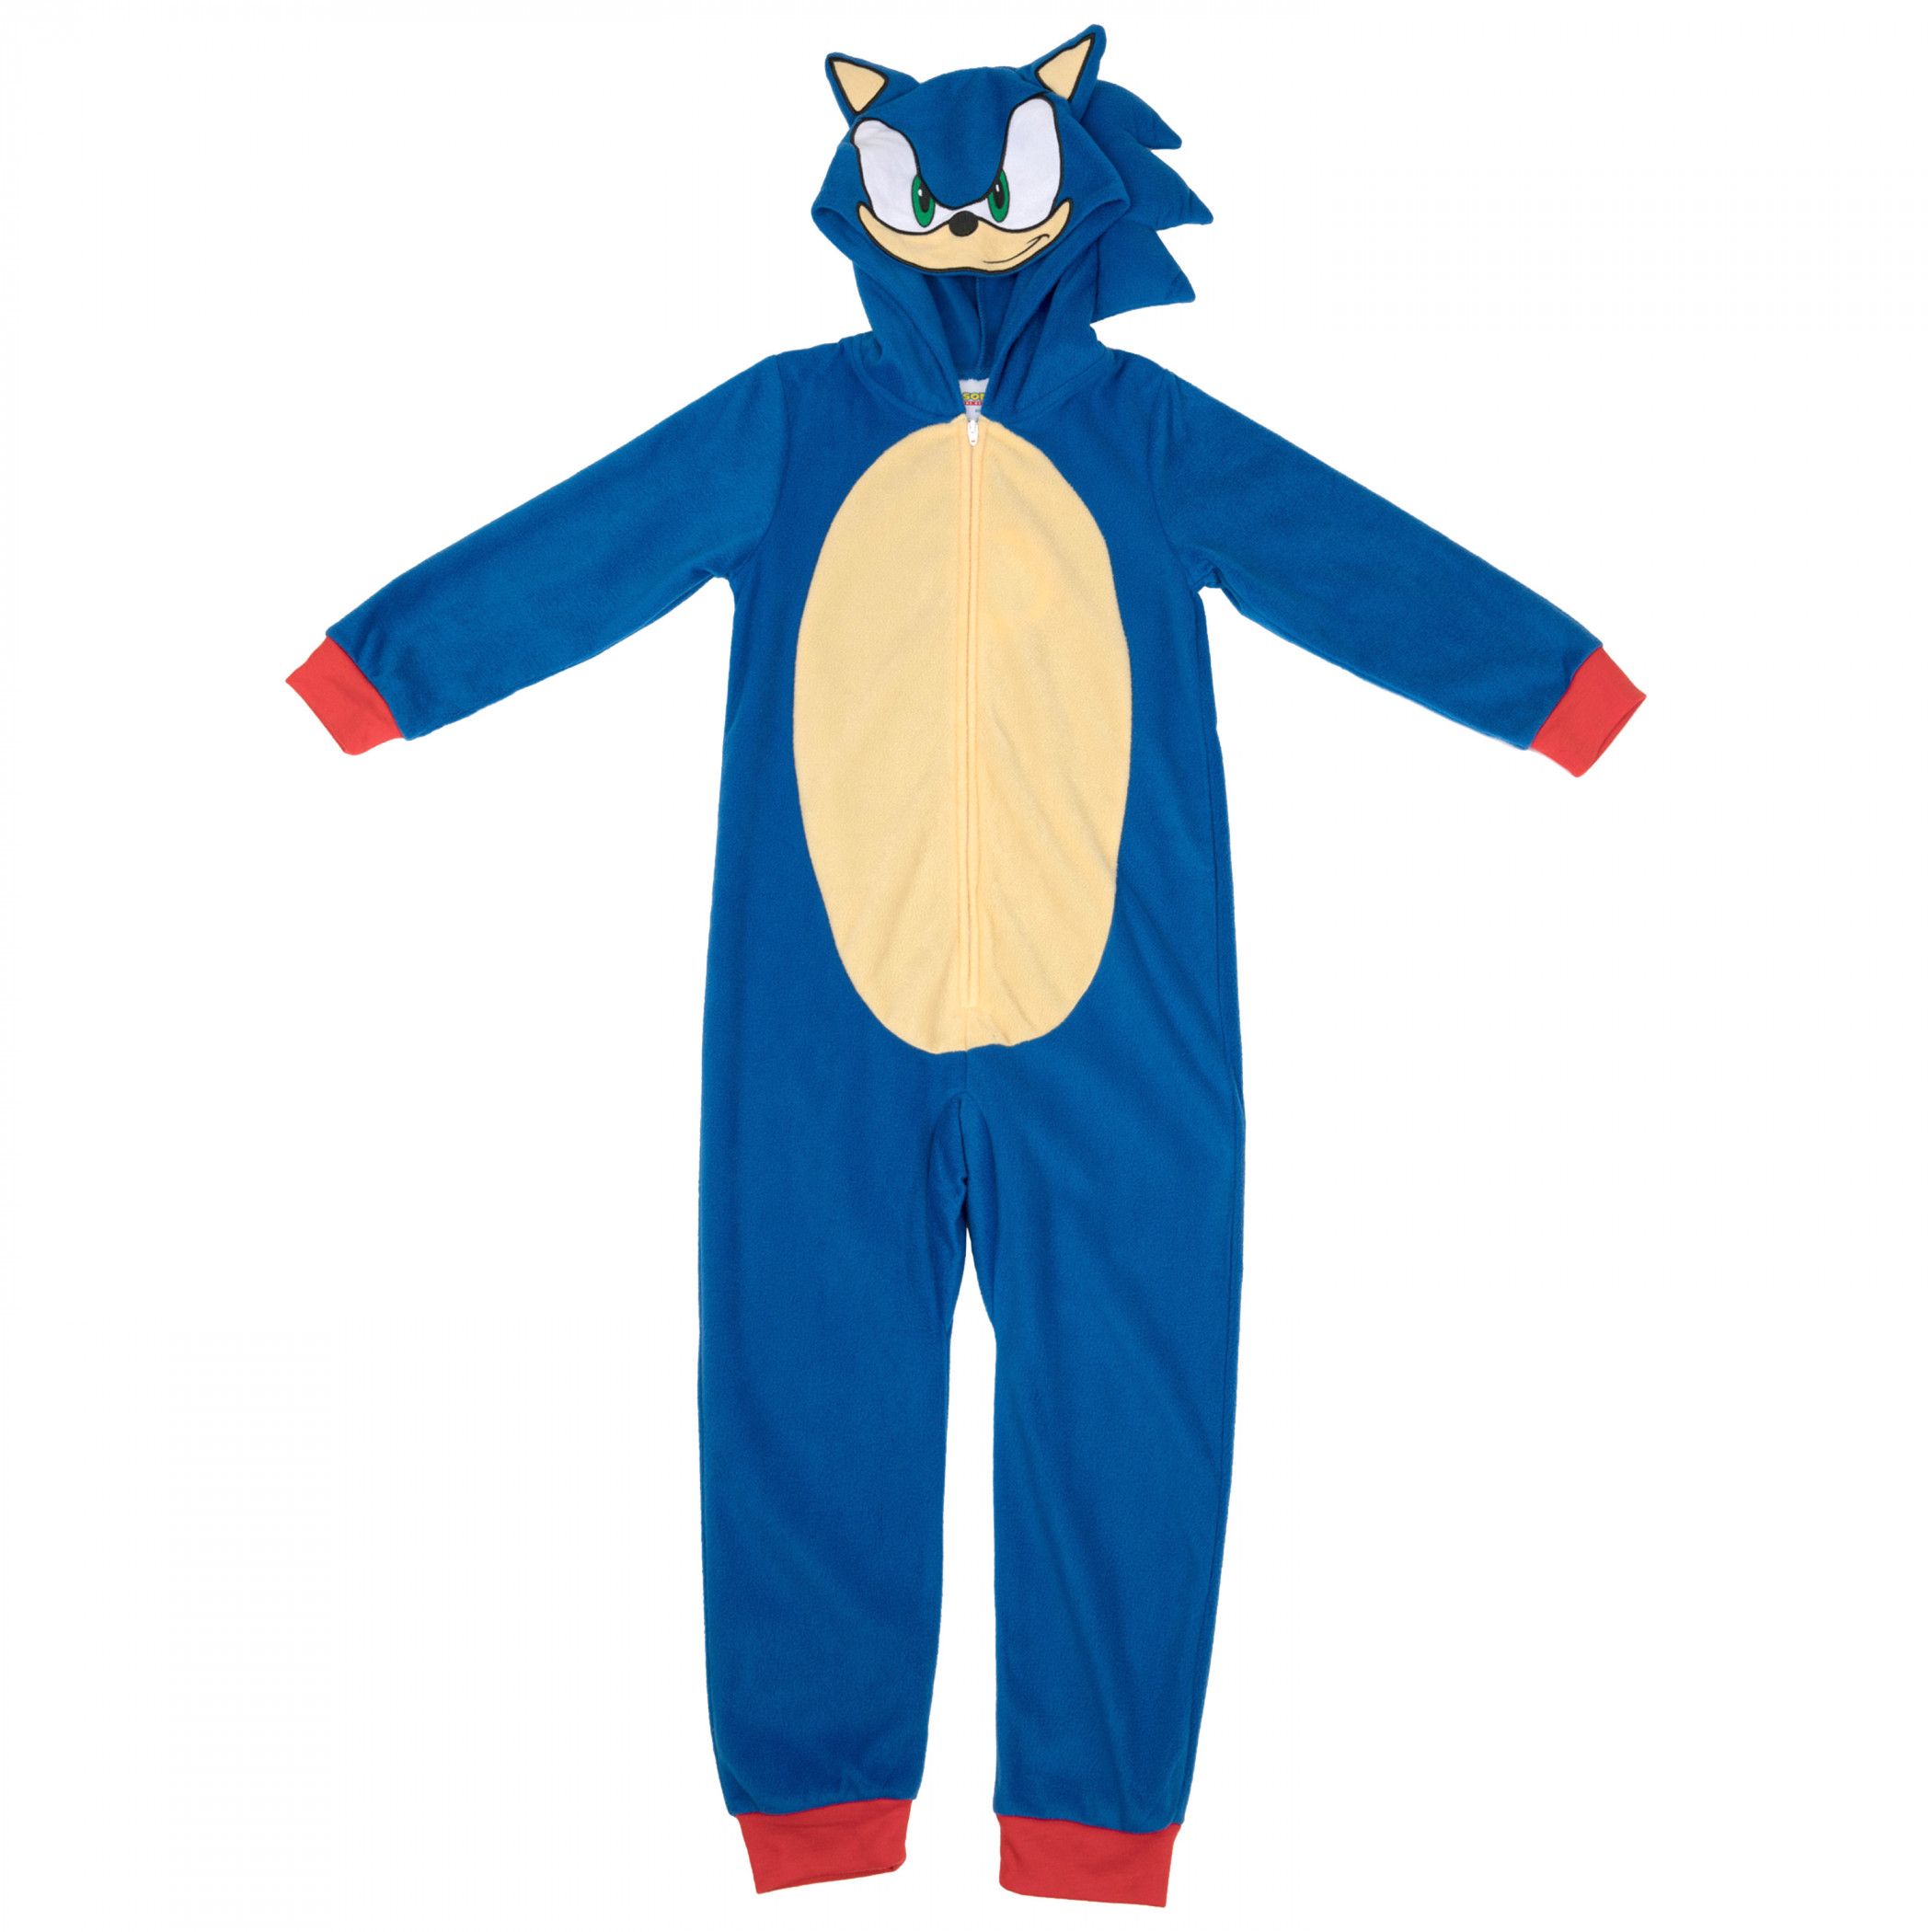 Sonic The Hedgehog Character Cosplay Hooded Union Suit Pajamas